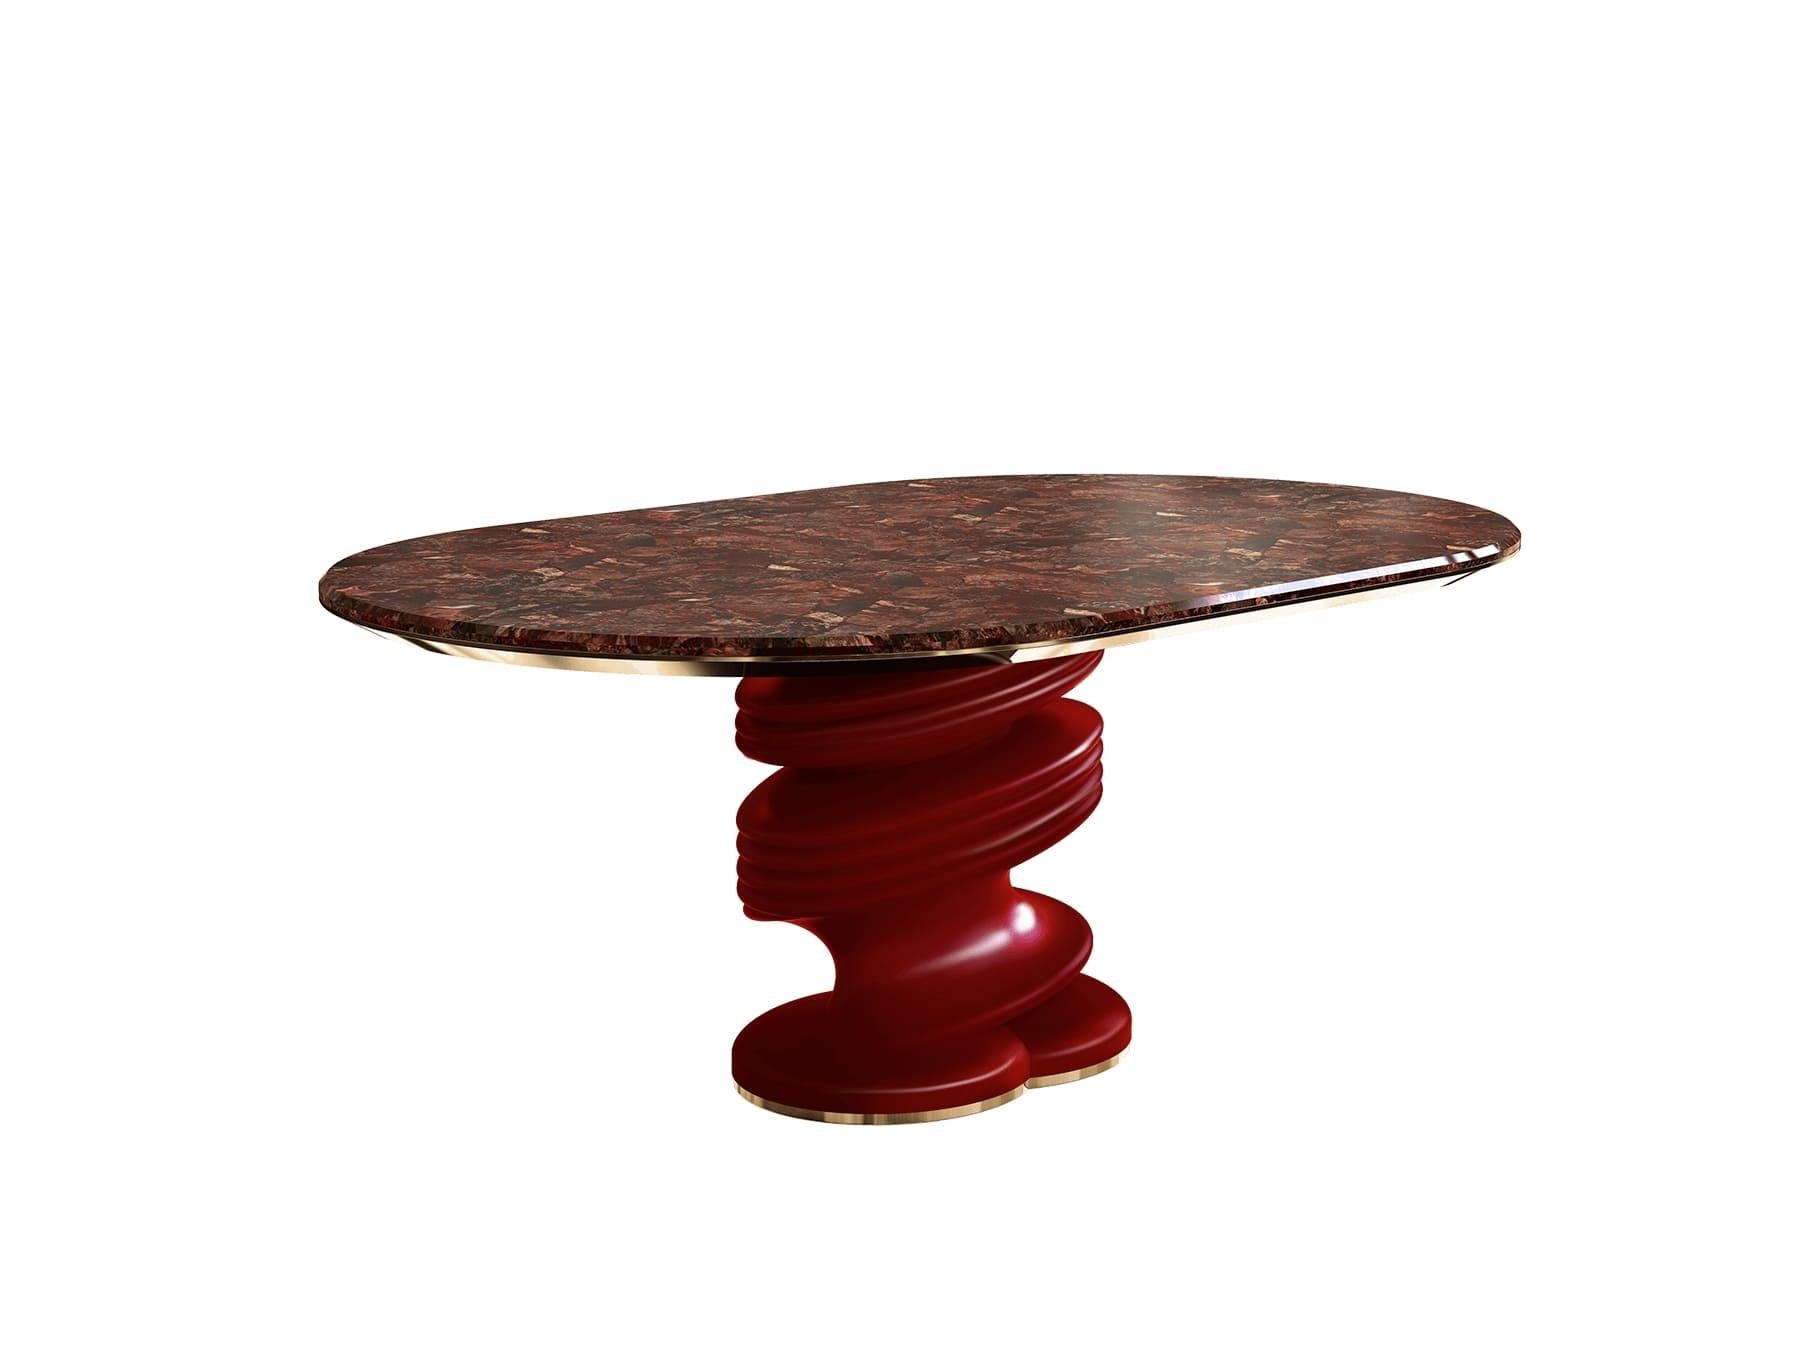 Portuguese Contemporary Red Levanto Marble Oval Dining Table with Base Lacquered in Red